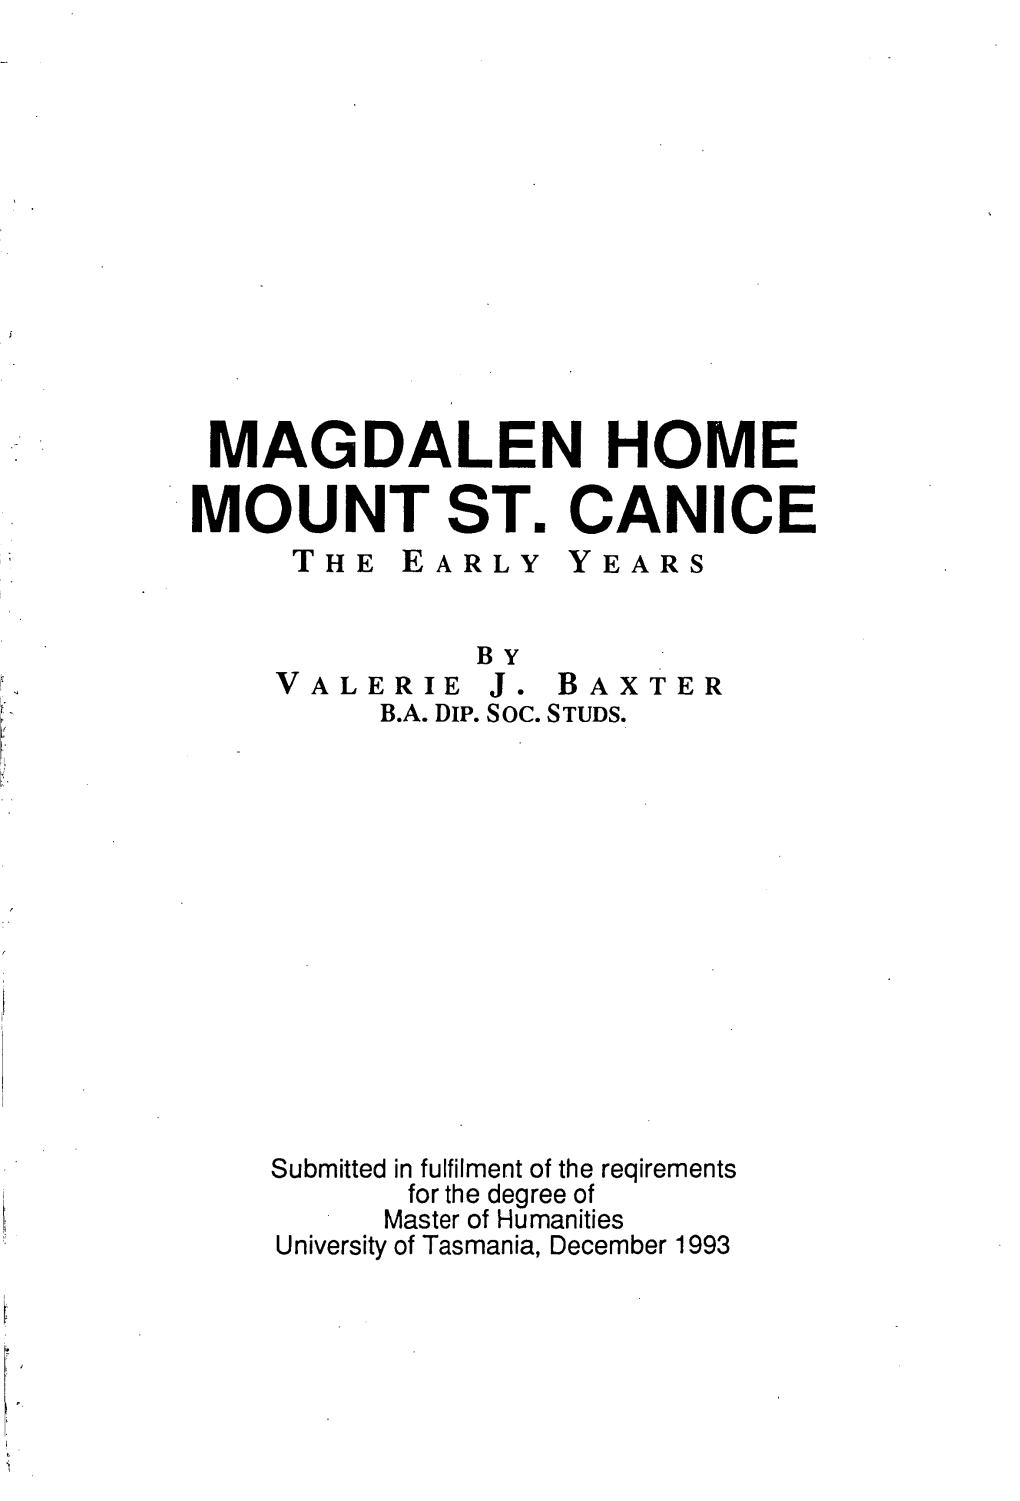 Magdalen Home, Mount St. Canice